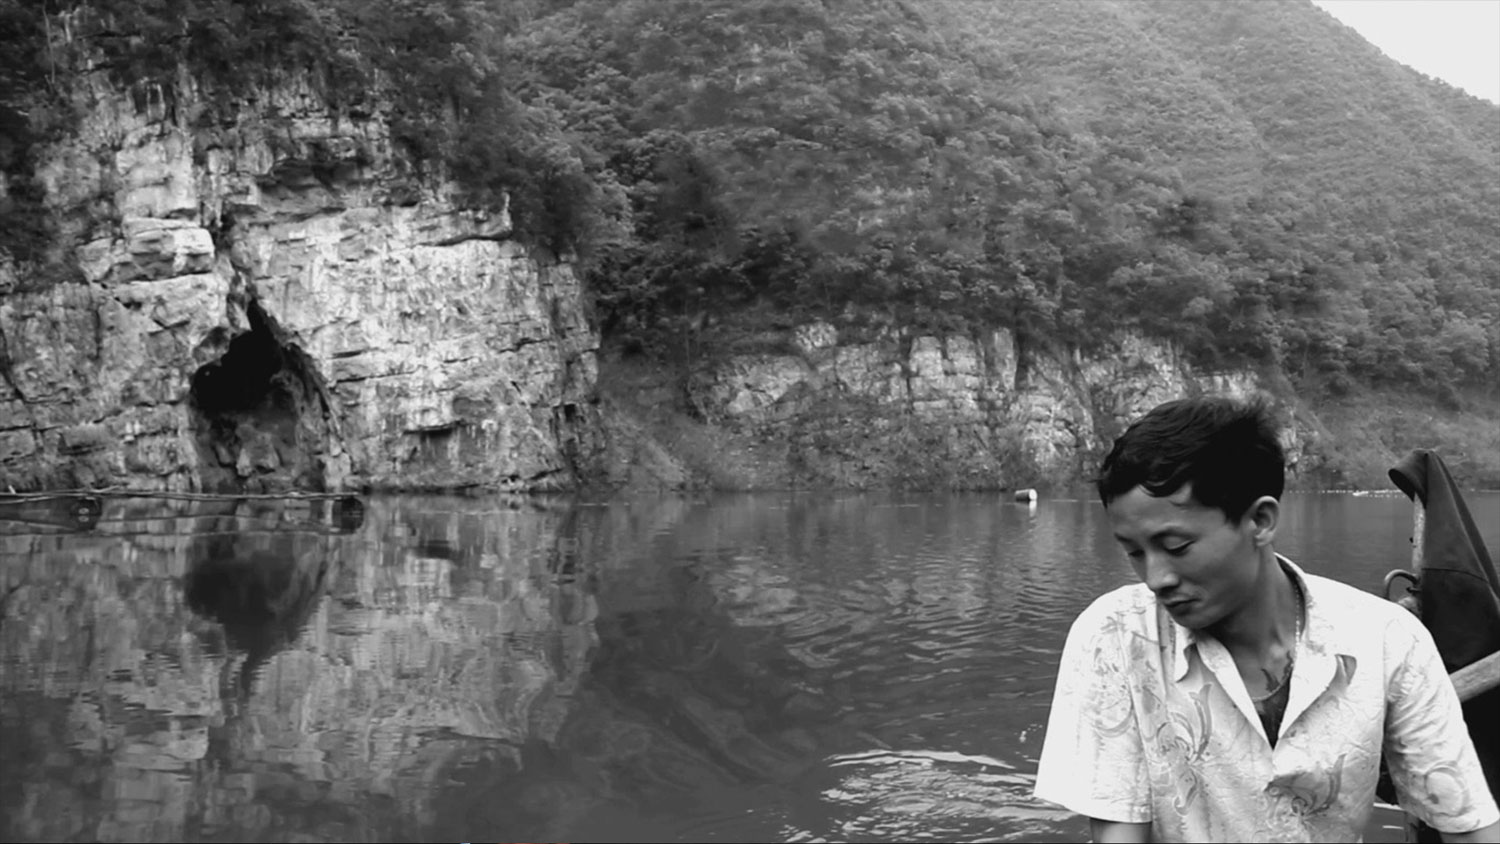 an asian person sits eyes cast down in a boat on a still lake with sheer rock sides